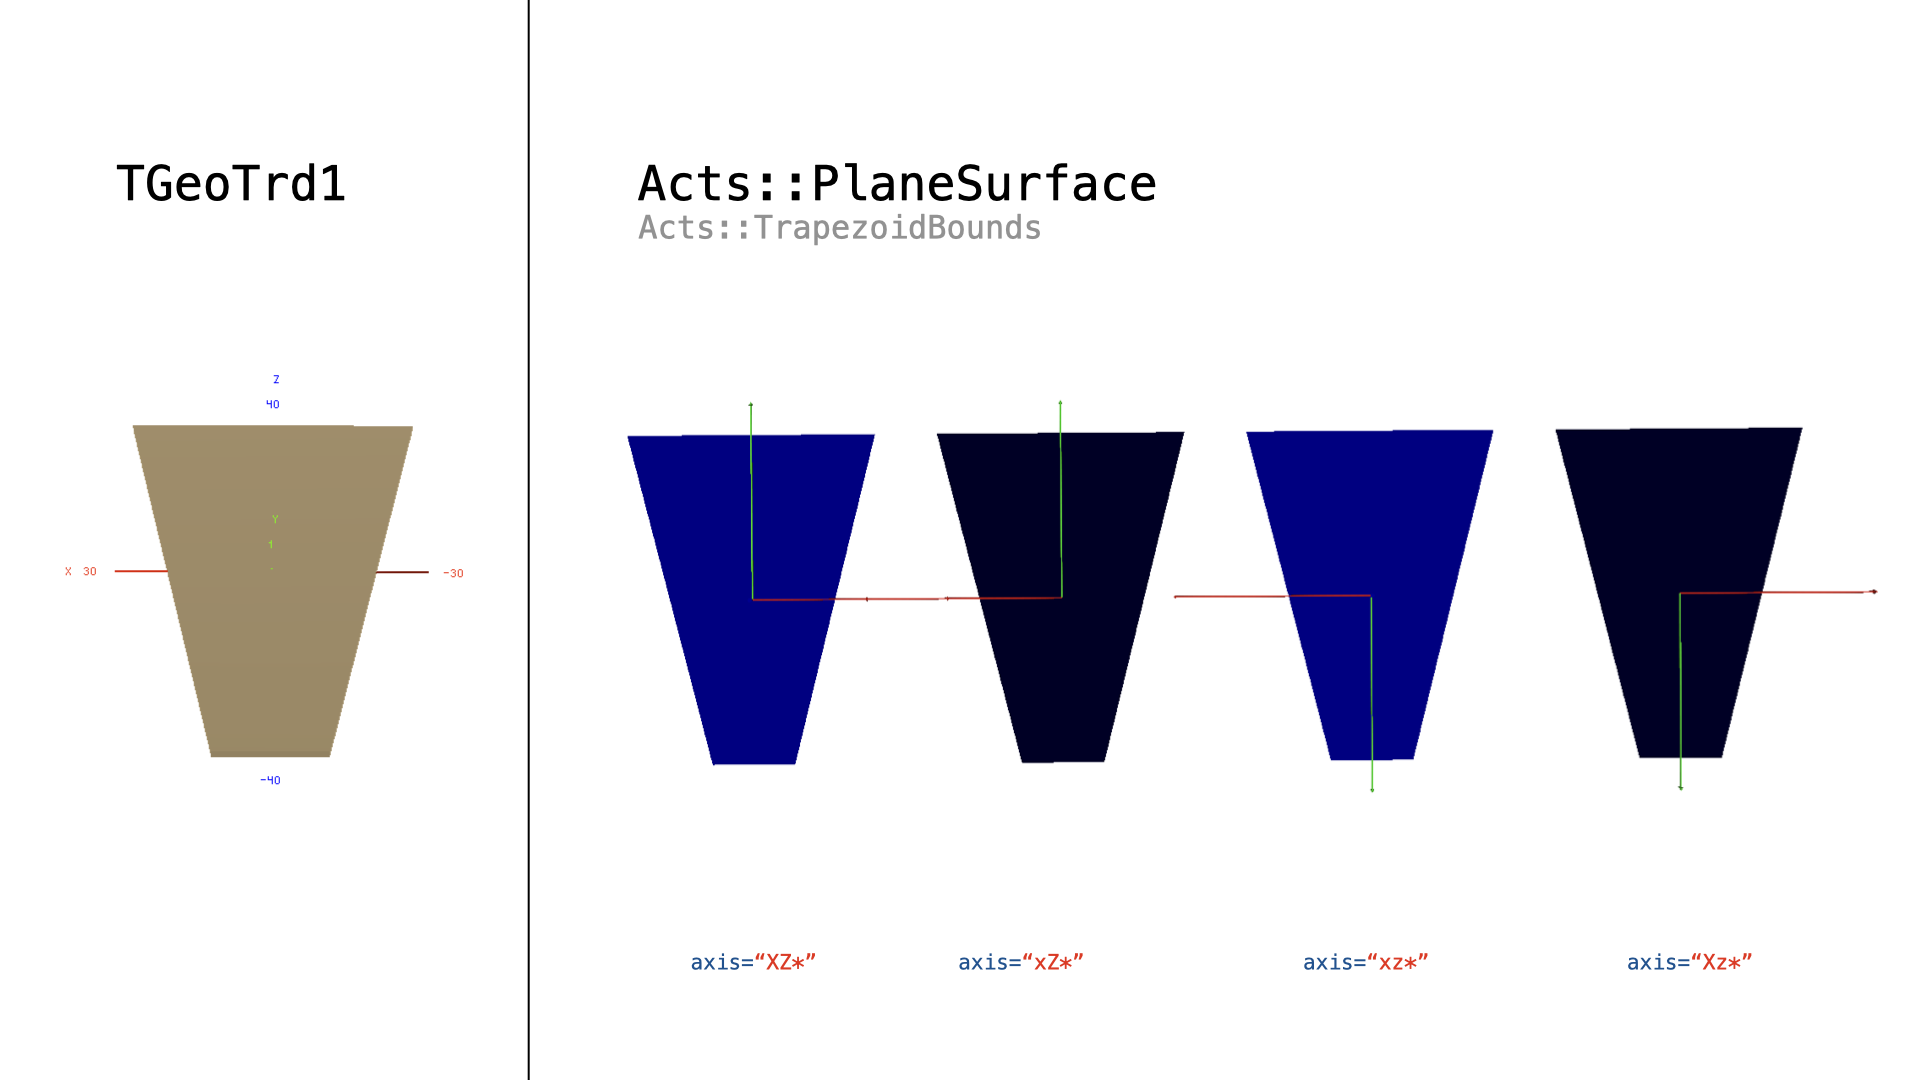 Conversion of a ``TGeoTrd1`` shape into a ``Acts::PlaneSurface`` with ``Acts::TrapezoidBounds``. The axes definitions need to be ``(x/X)(z/Z)(*/*)``.